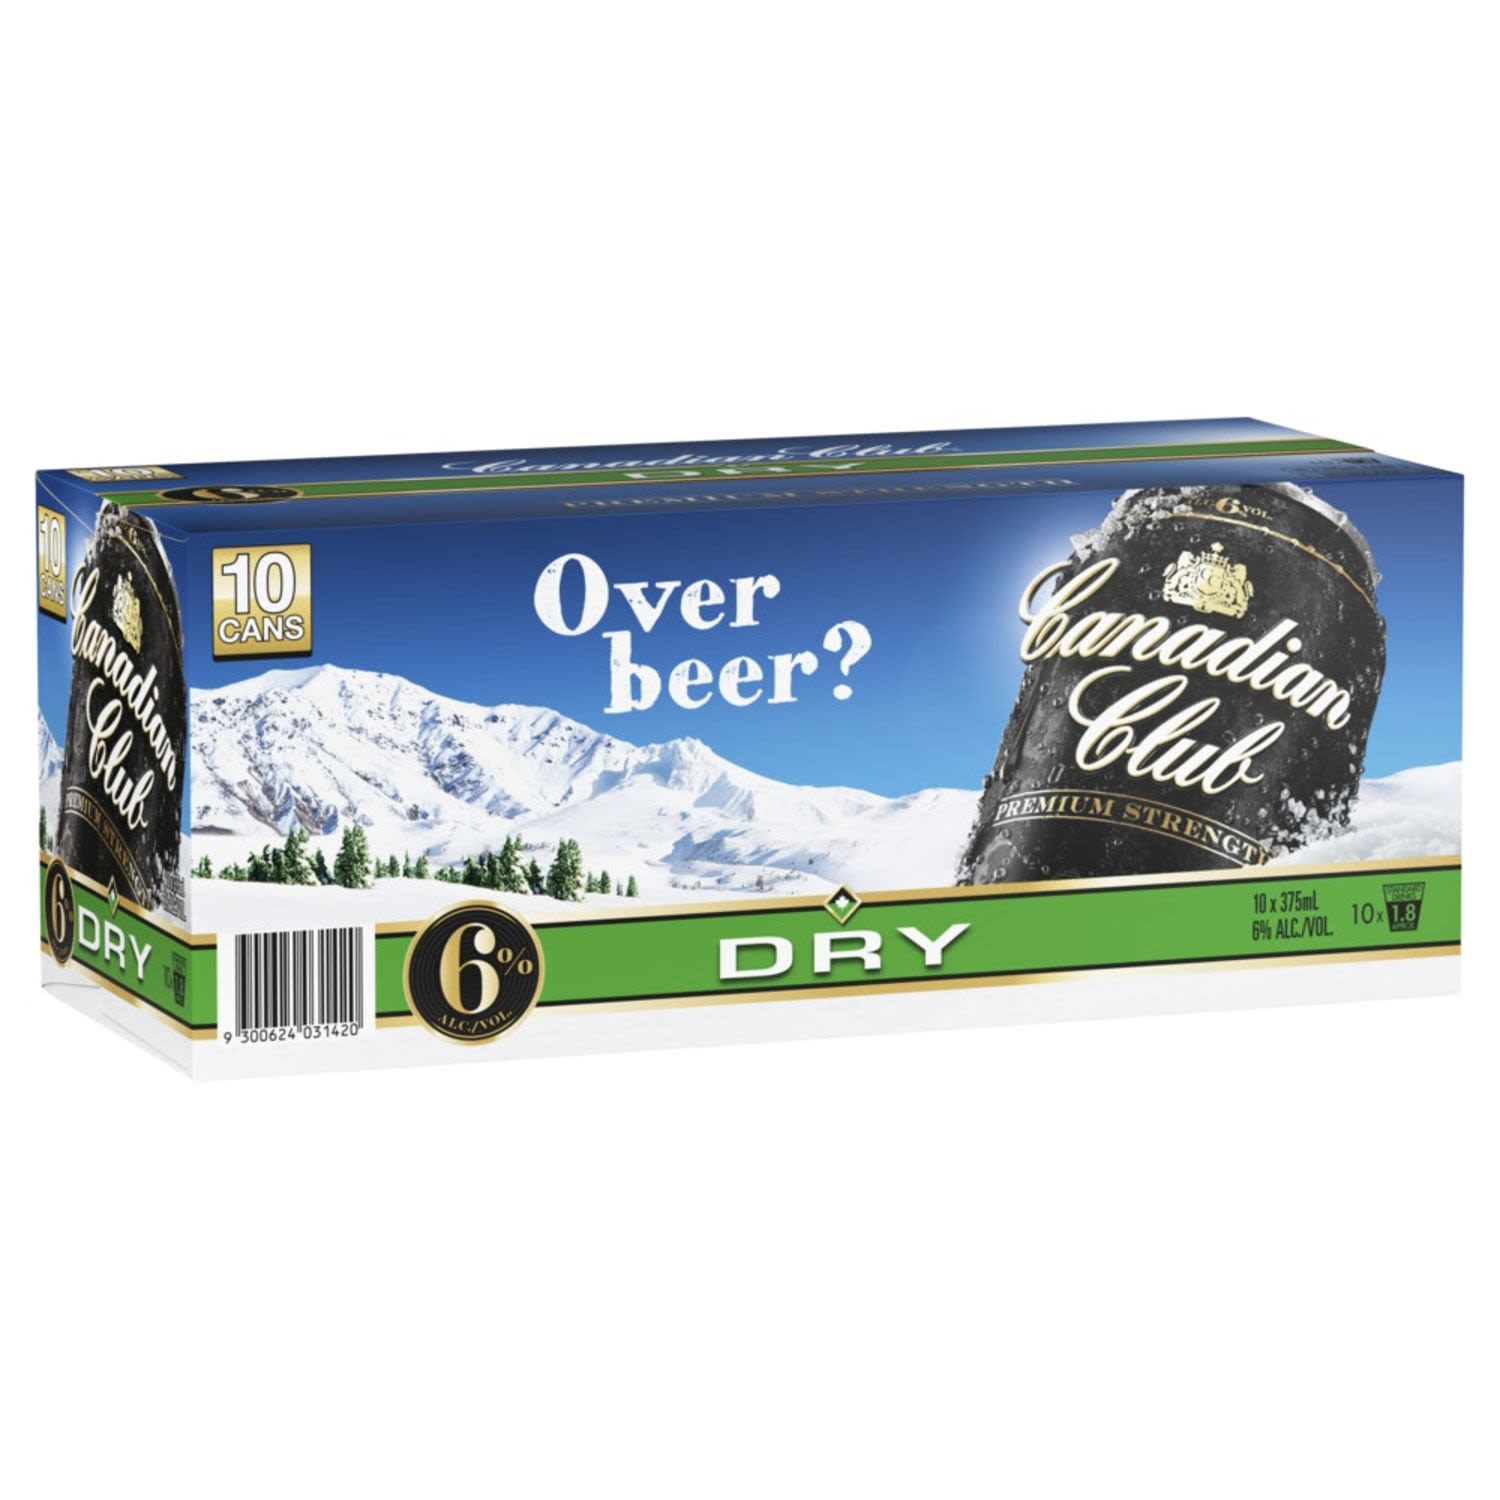 Canadian Club & Dry Premium 6% Can 375mL 10 Pack